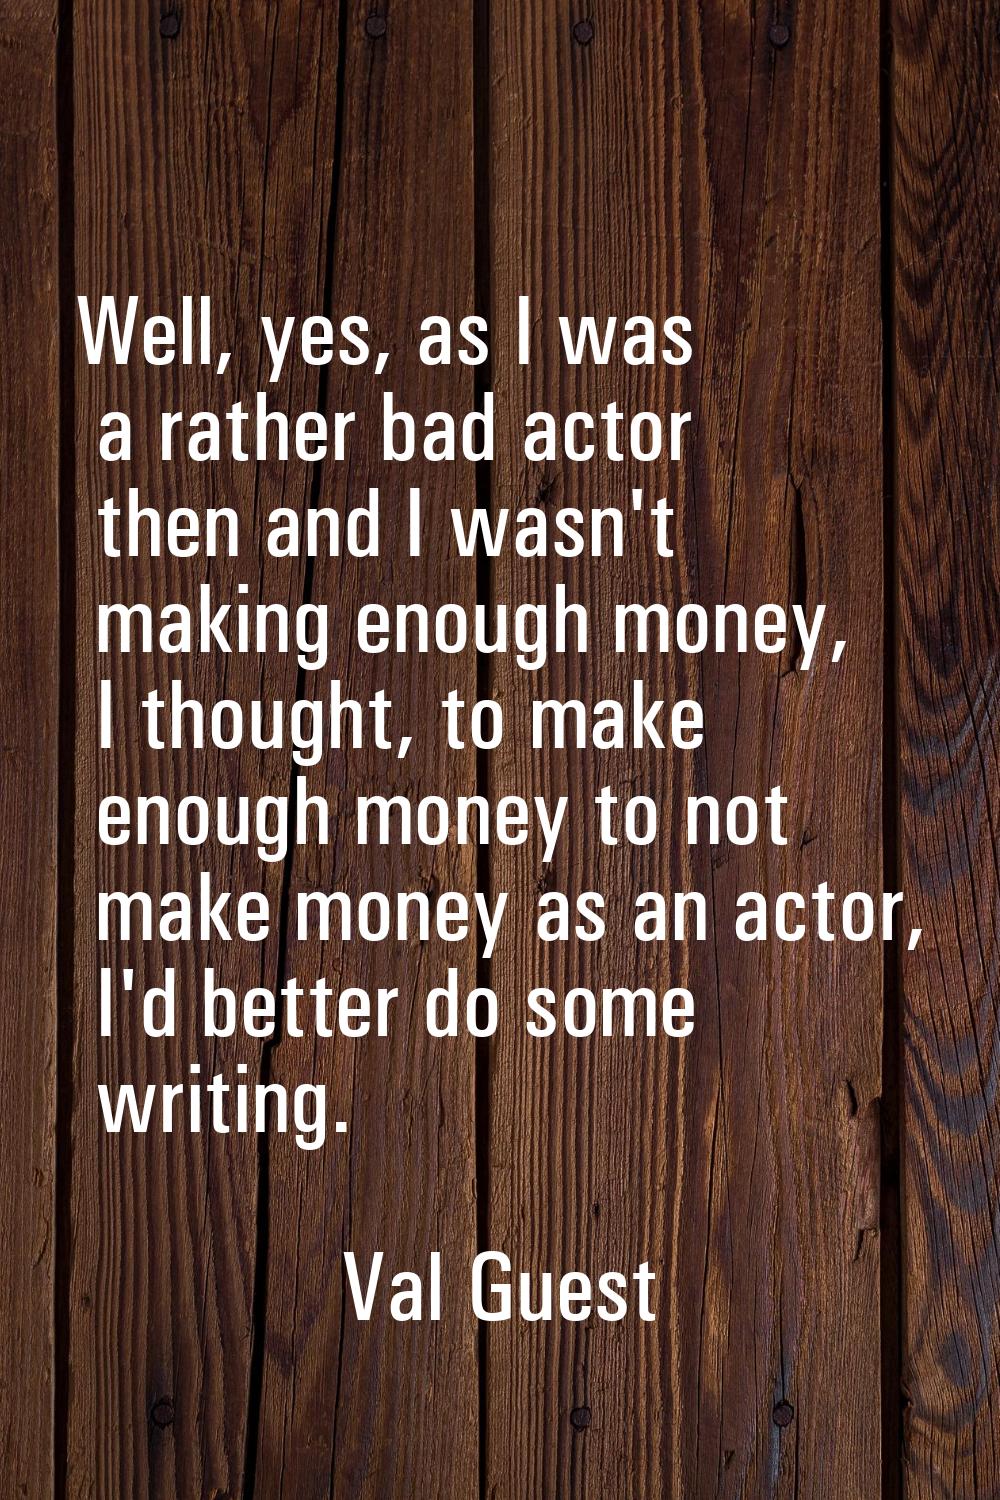 Well, yes, as I was a rather bad actor then and I wasn't making enough money, I thought, to make en